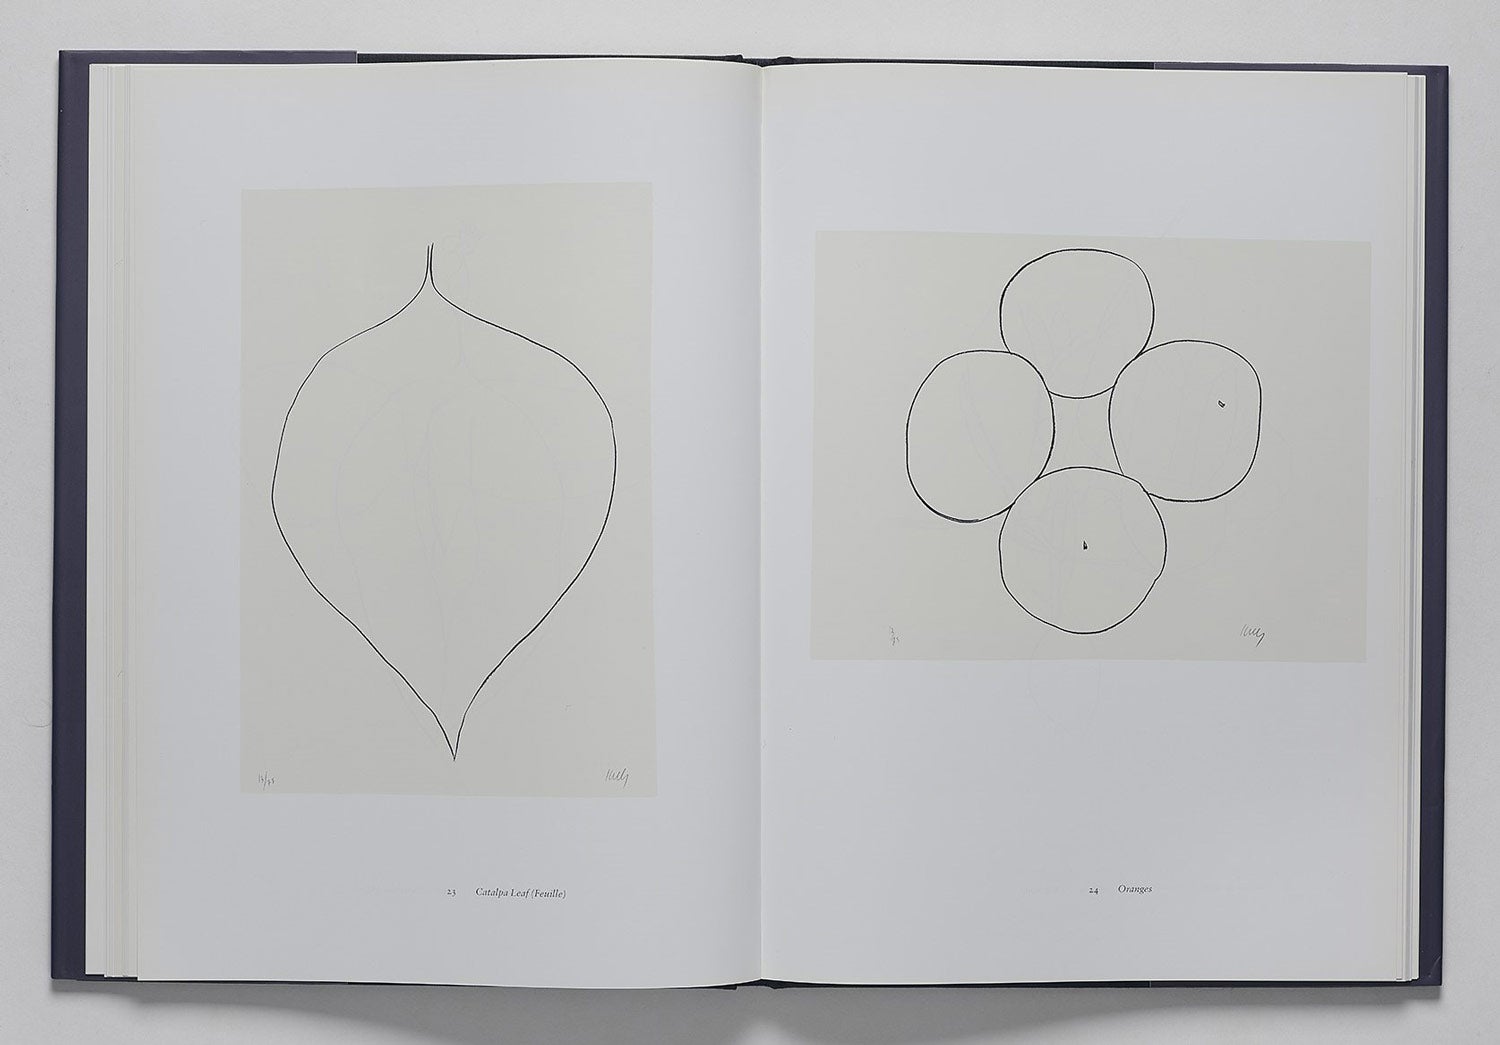 Book spread featuring two minimalist drawings of a leaf and four round fruits